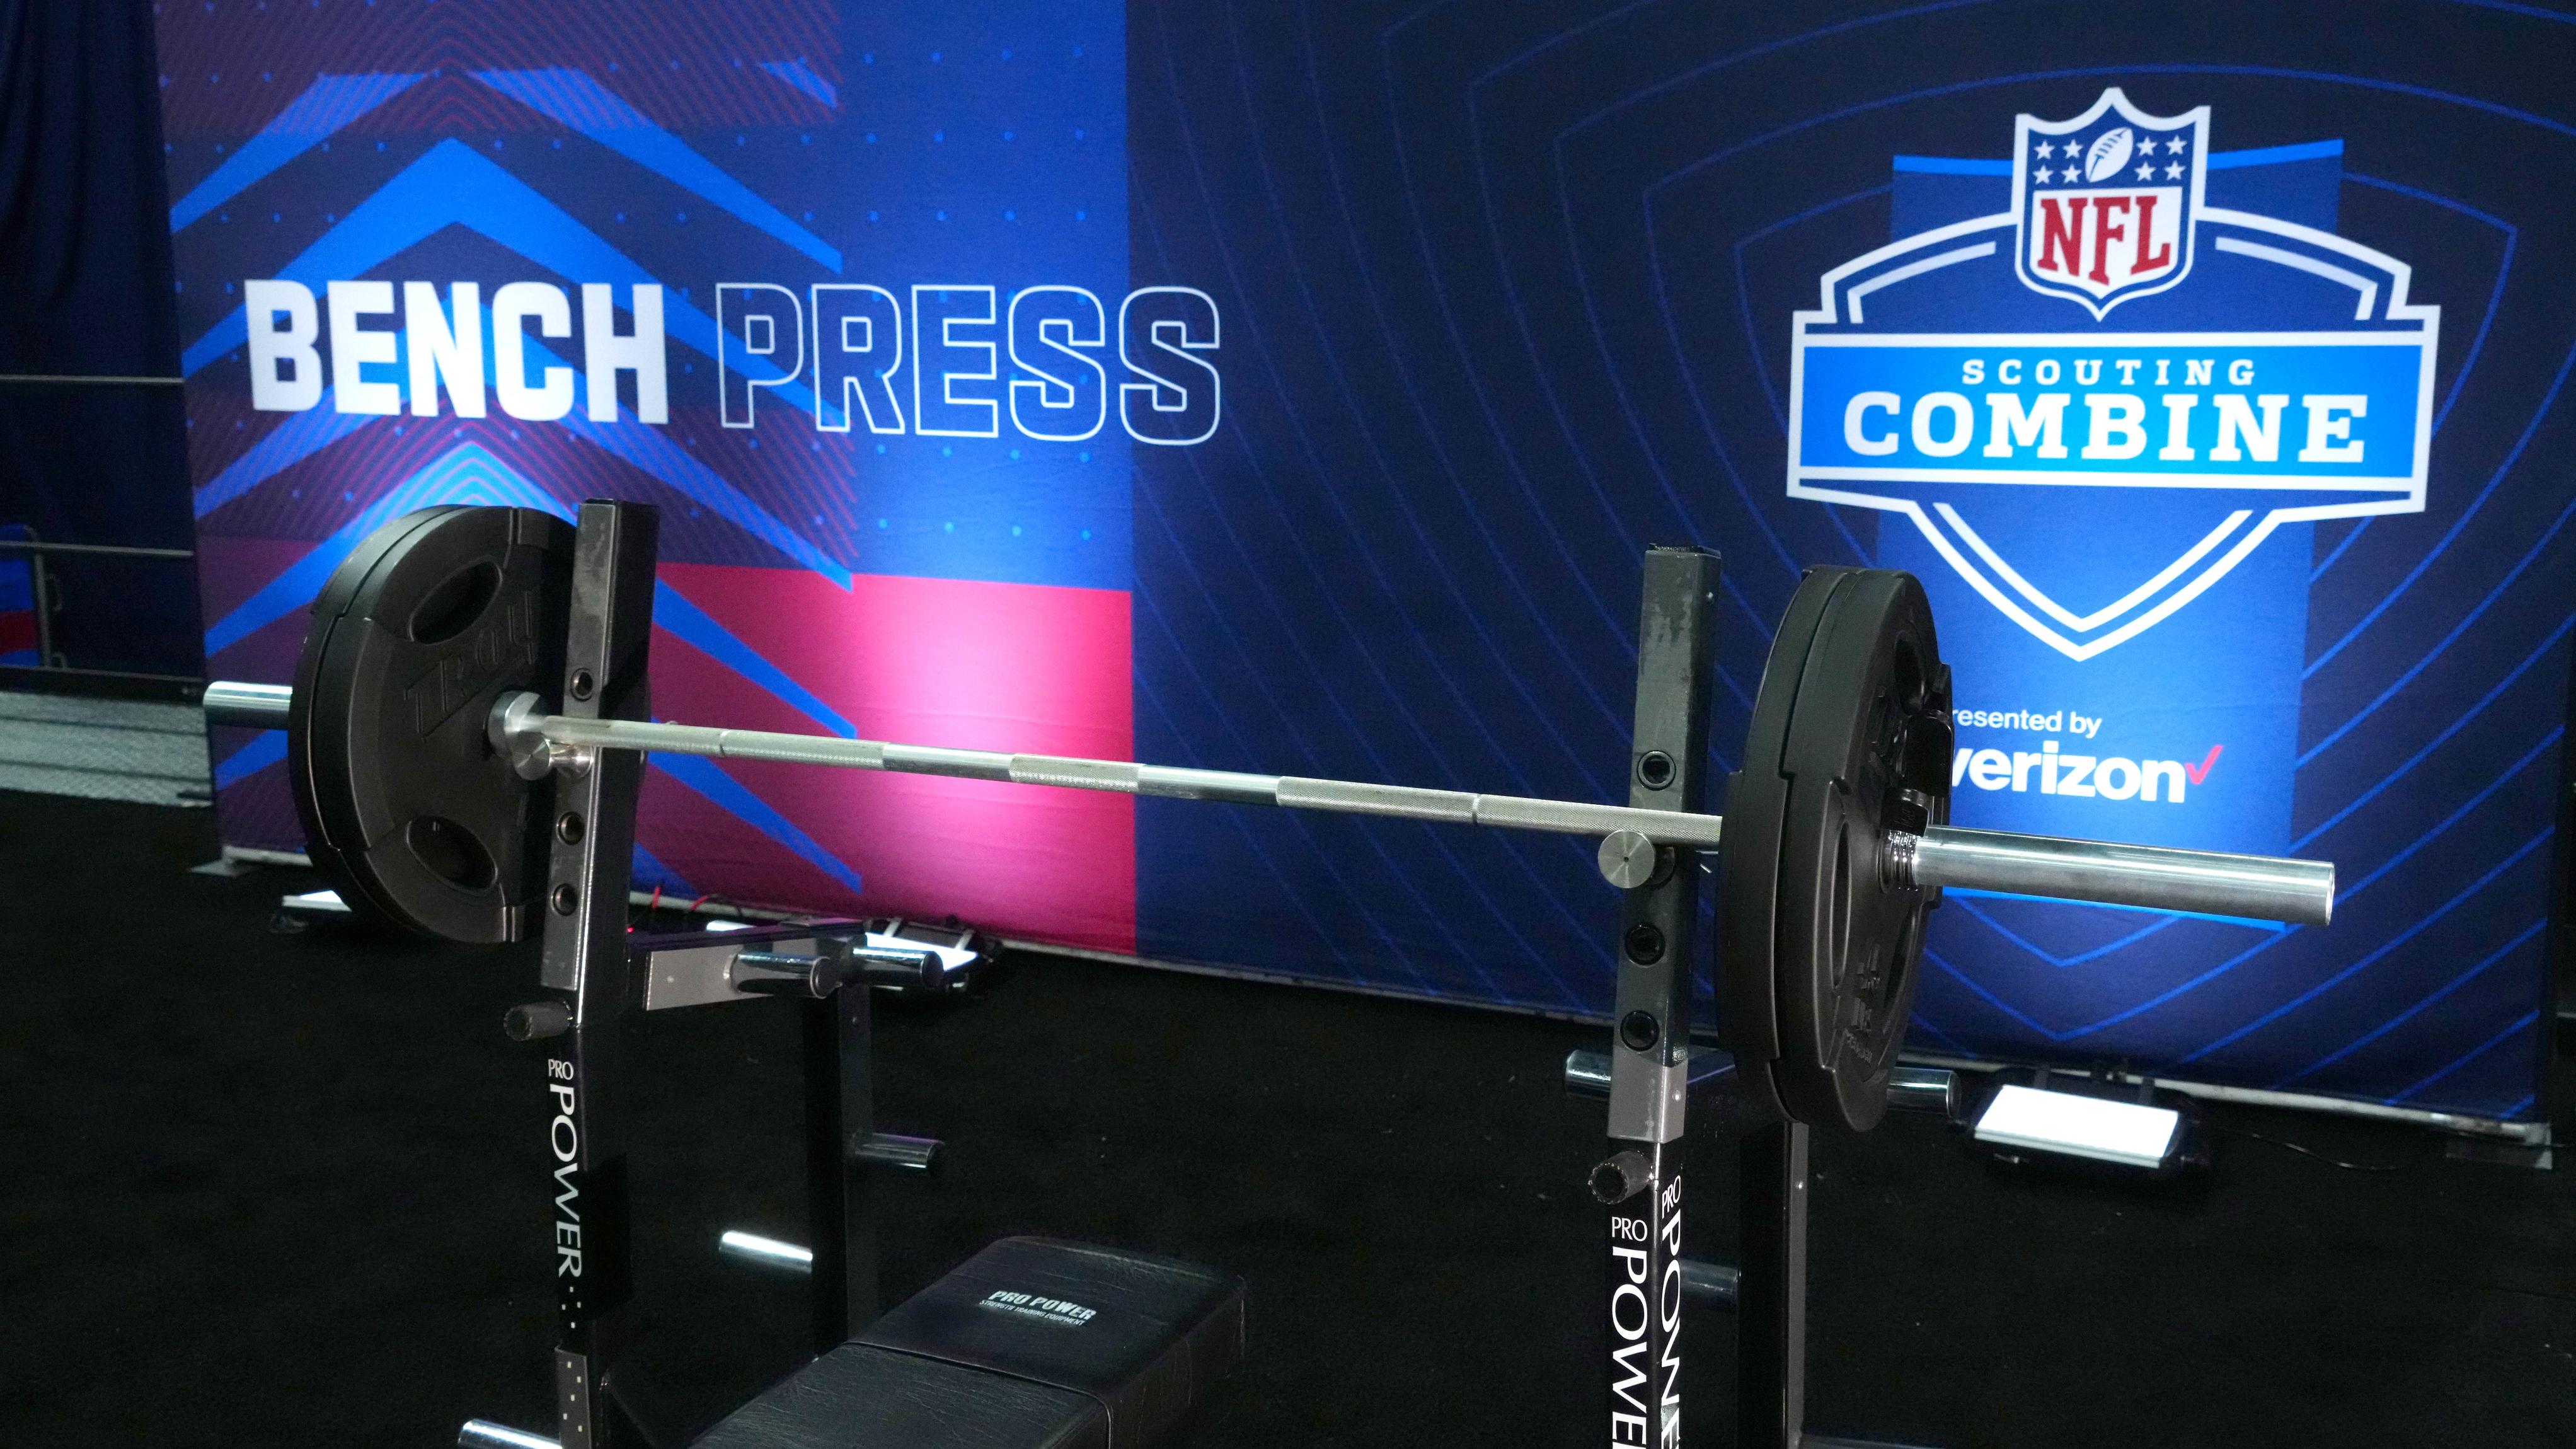 NFL combine bench press: Who did the most reps? What's the record